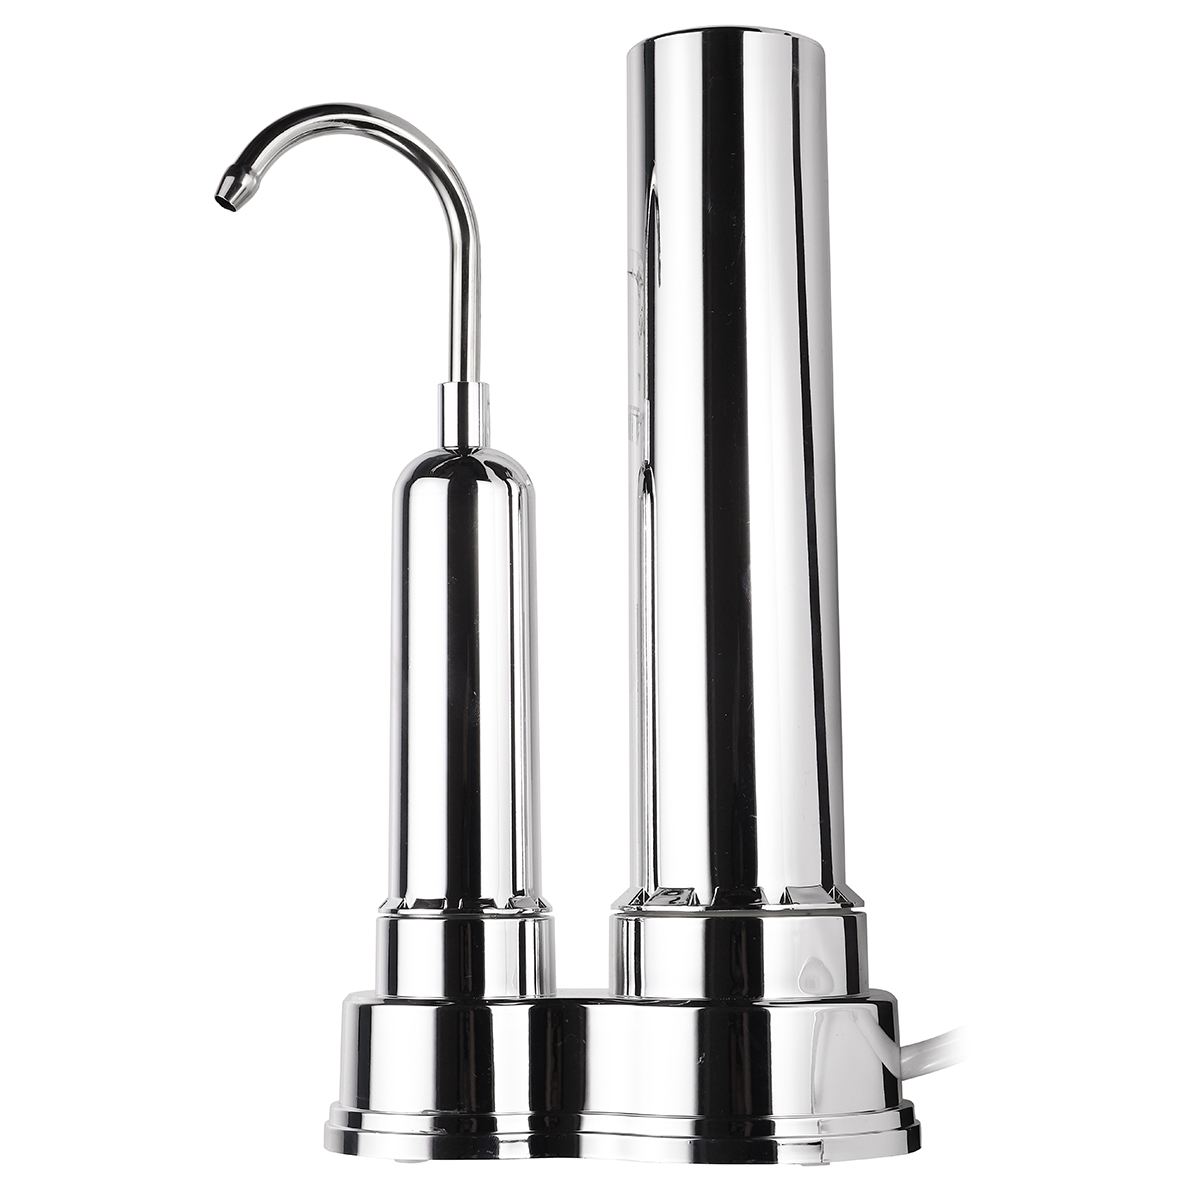 Countertop Water Filter Home Dual Stage Filtration Kitchen Tap Faucet Water Purifier Ceramic Filter Water Treatment Appliance